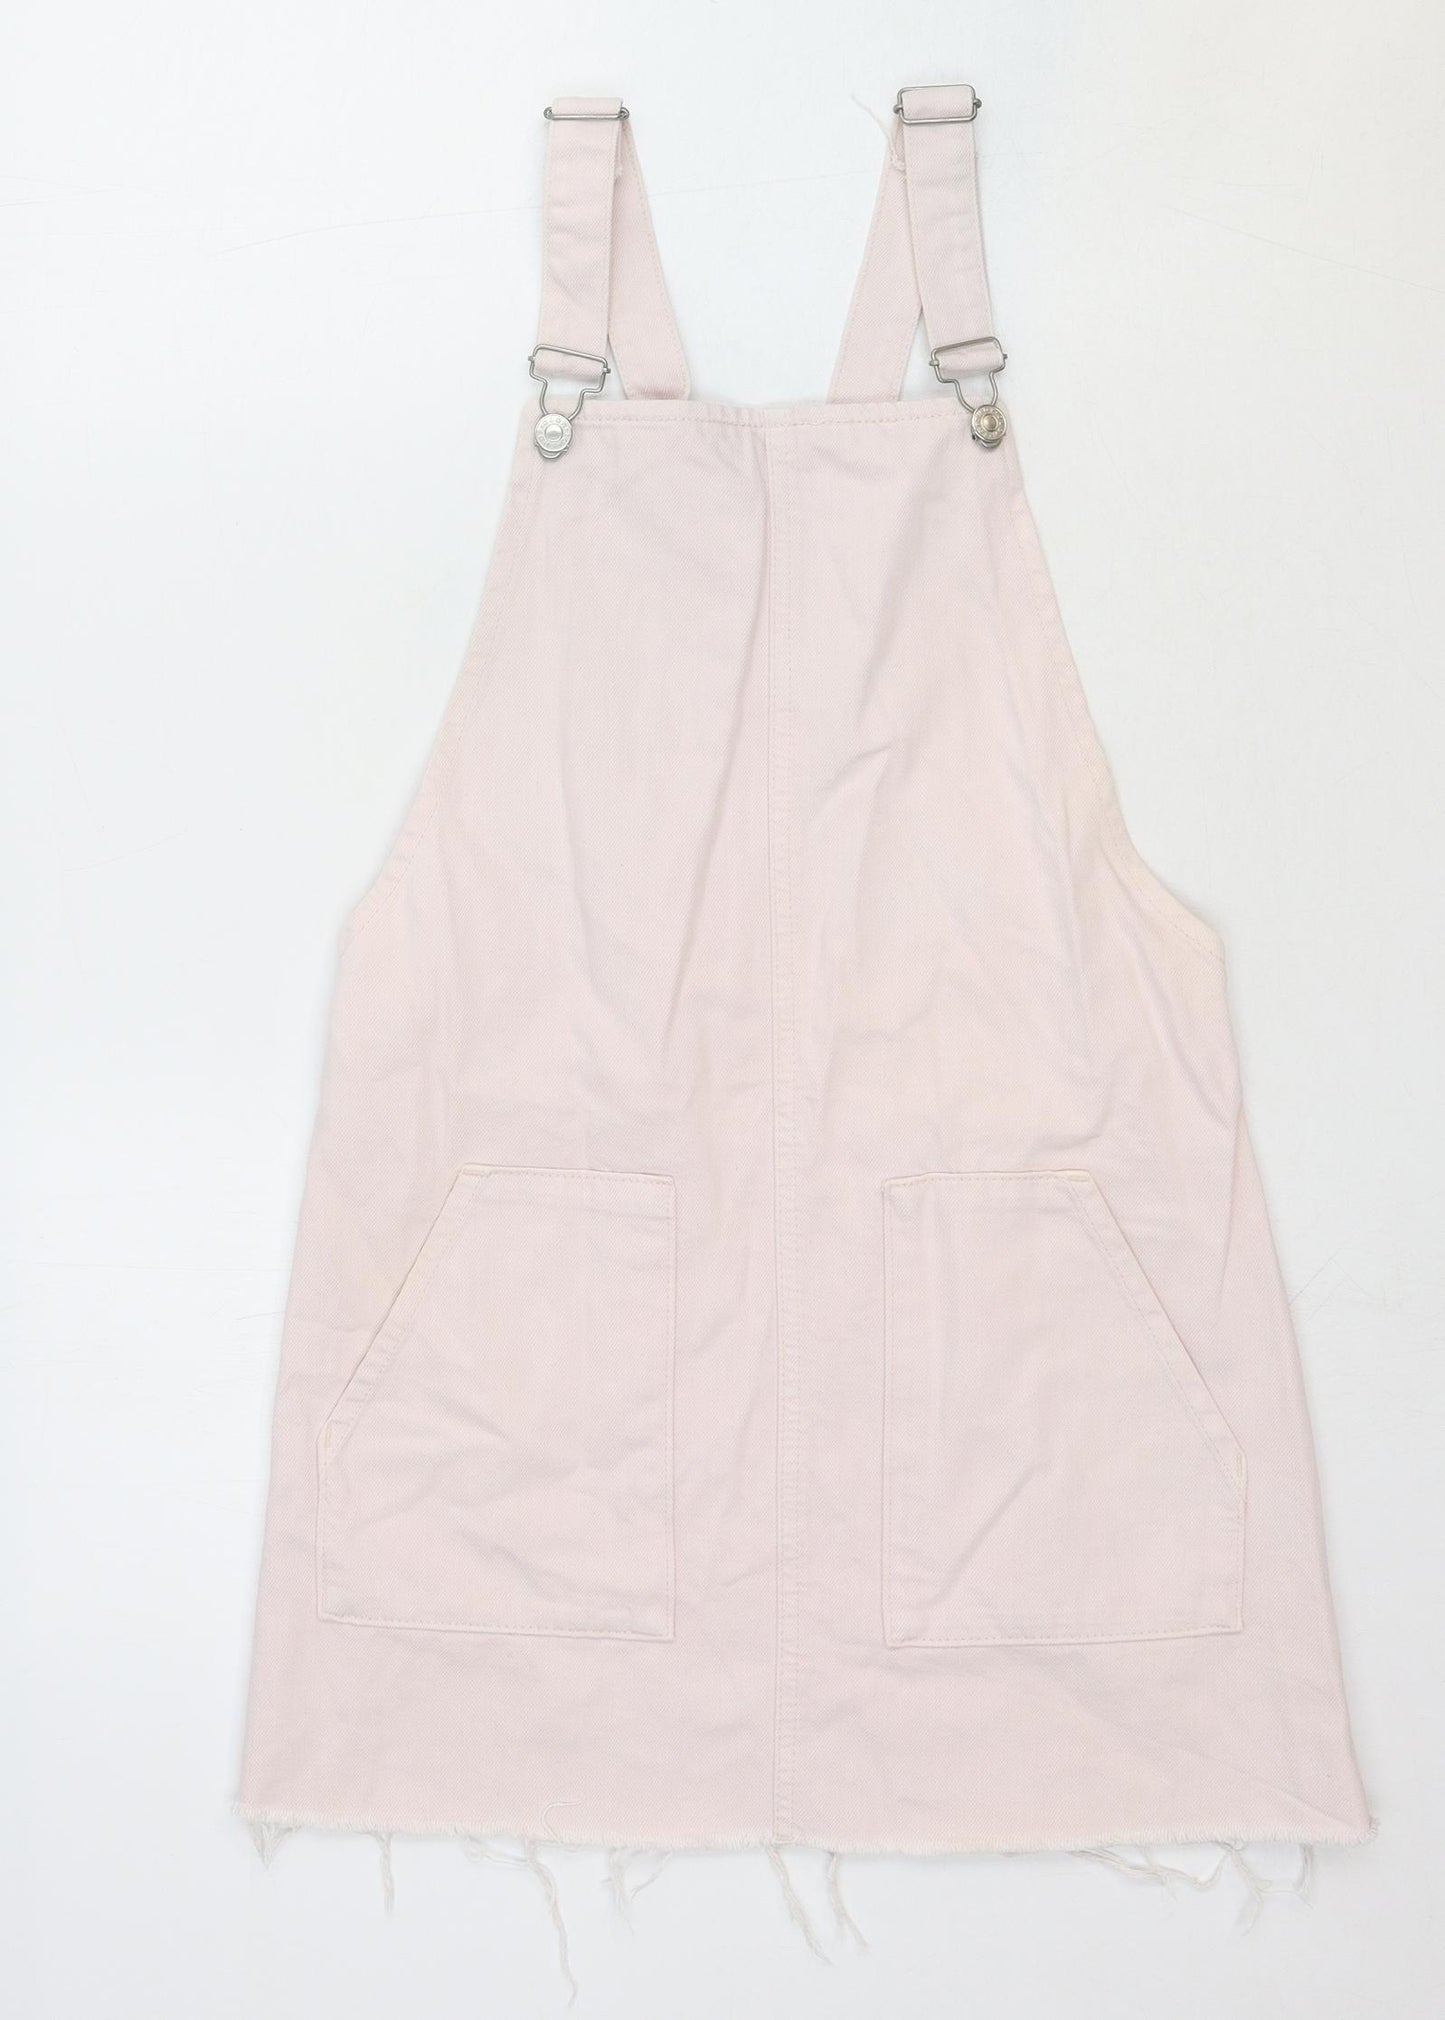 Topshop Womens Pink Cotton Pinafore/Dungaree Dress Size 8 Square Neck Button